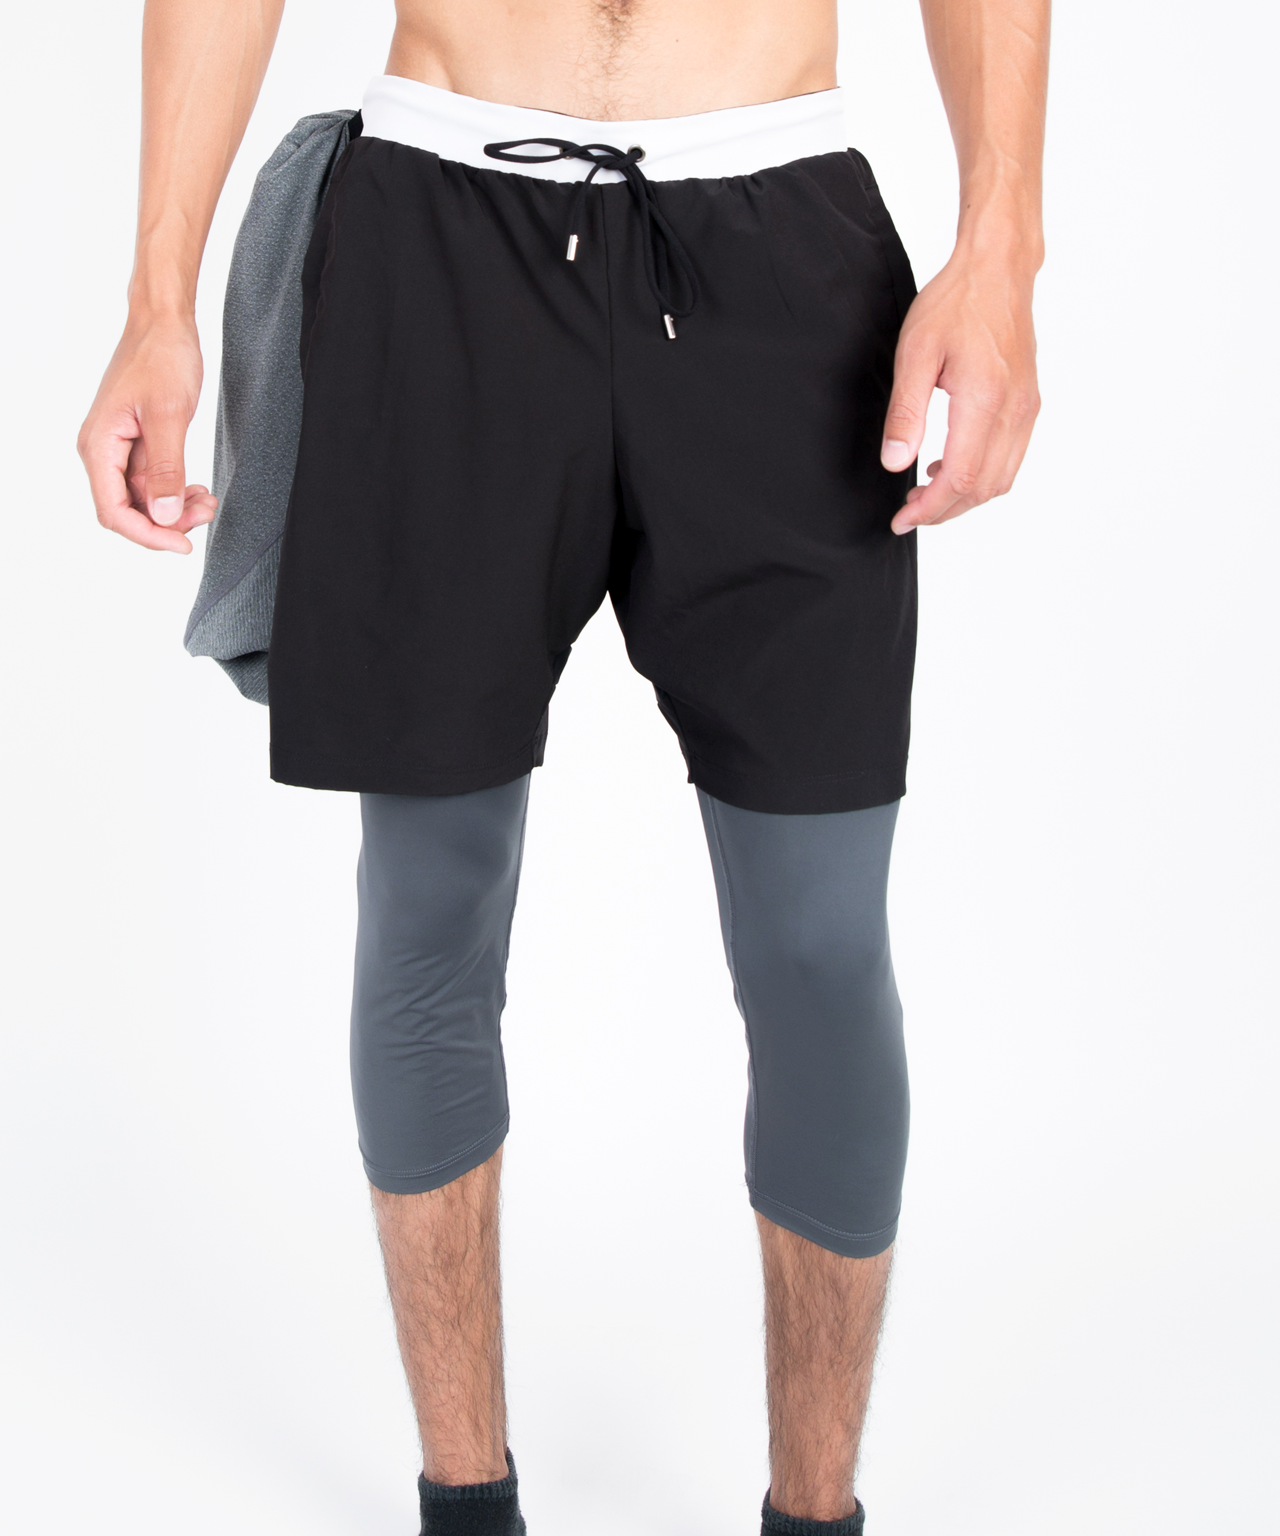 2 in 1 compression shorts